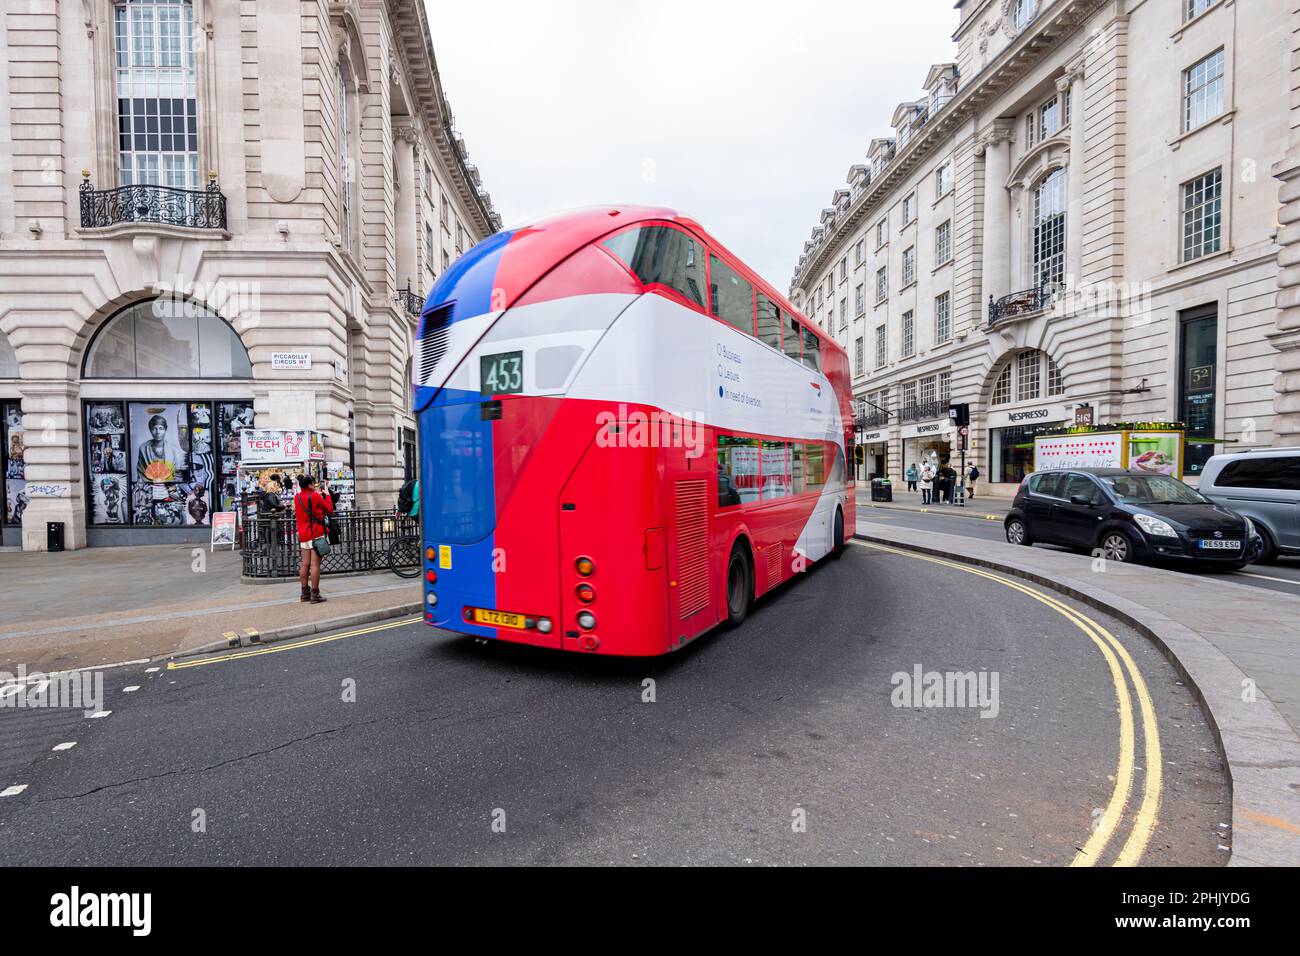 Toot bus, a hop on, hop off tour bus seen on Piccadilly in London Stock Photo